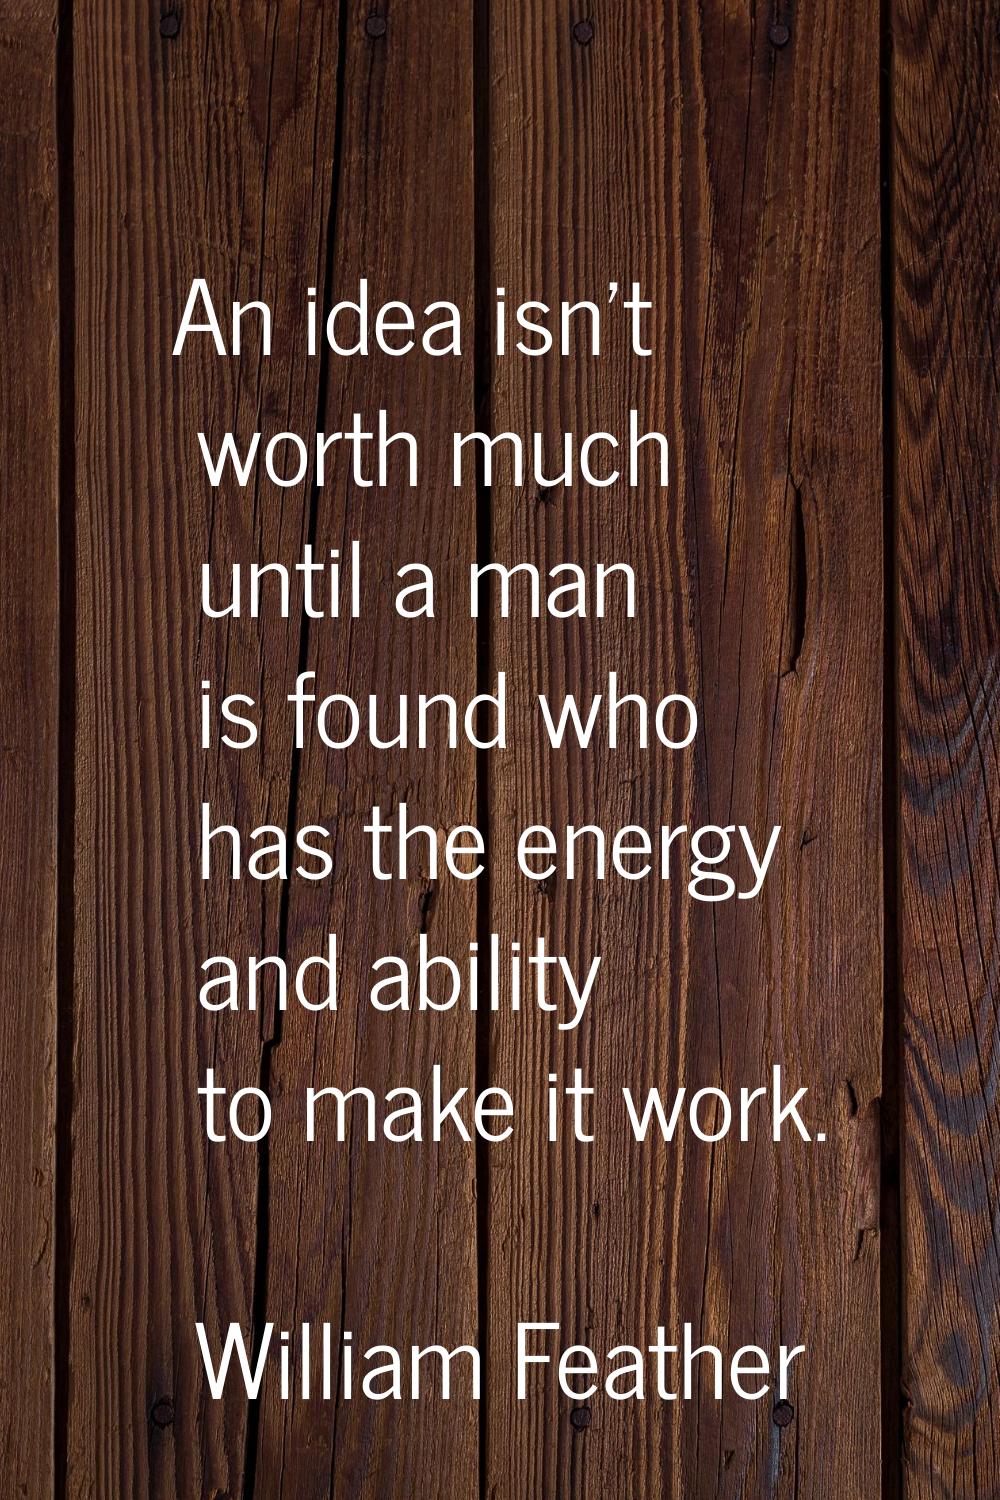 An idea isn't worth much until a man is found who has the energy and ability to make it work.